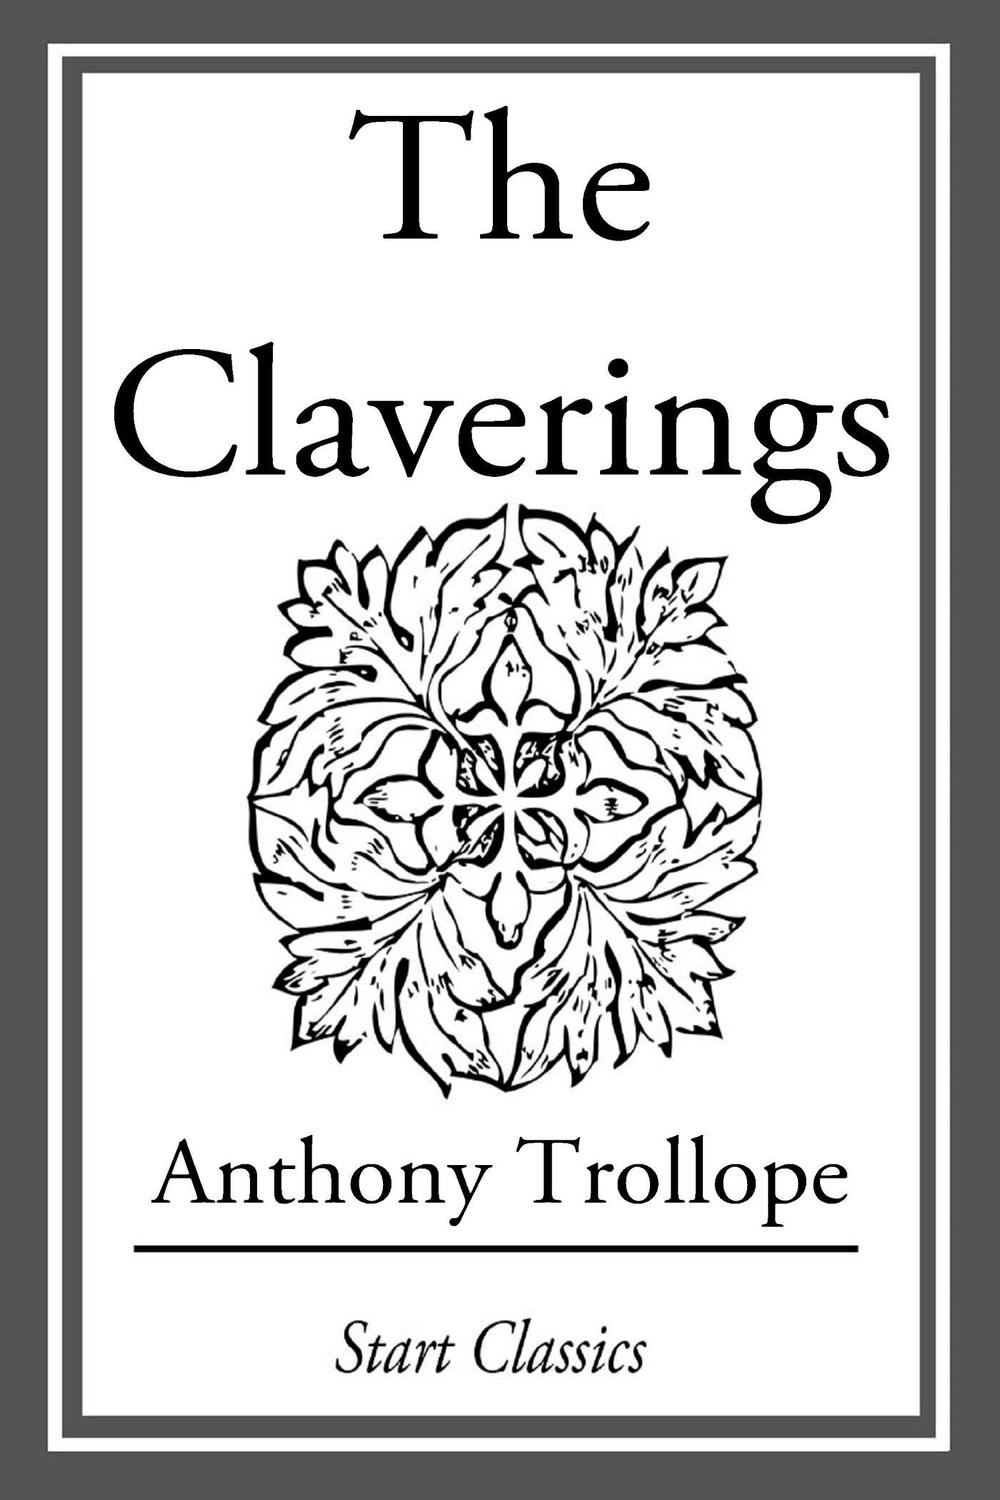 The Claverings - Anthony Trollope